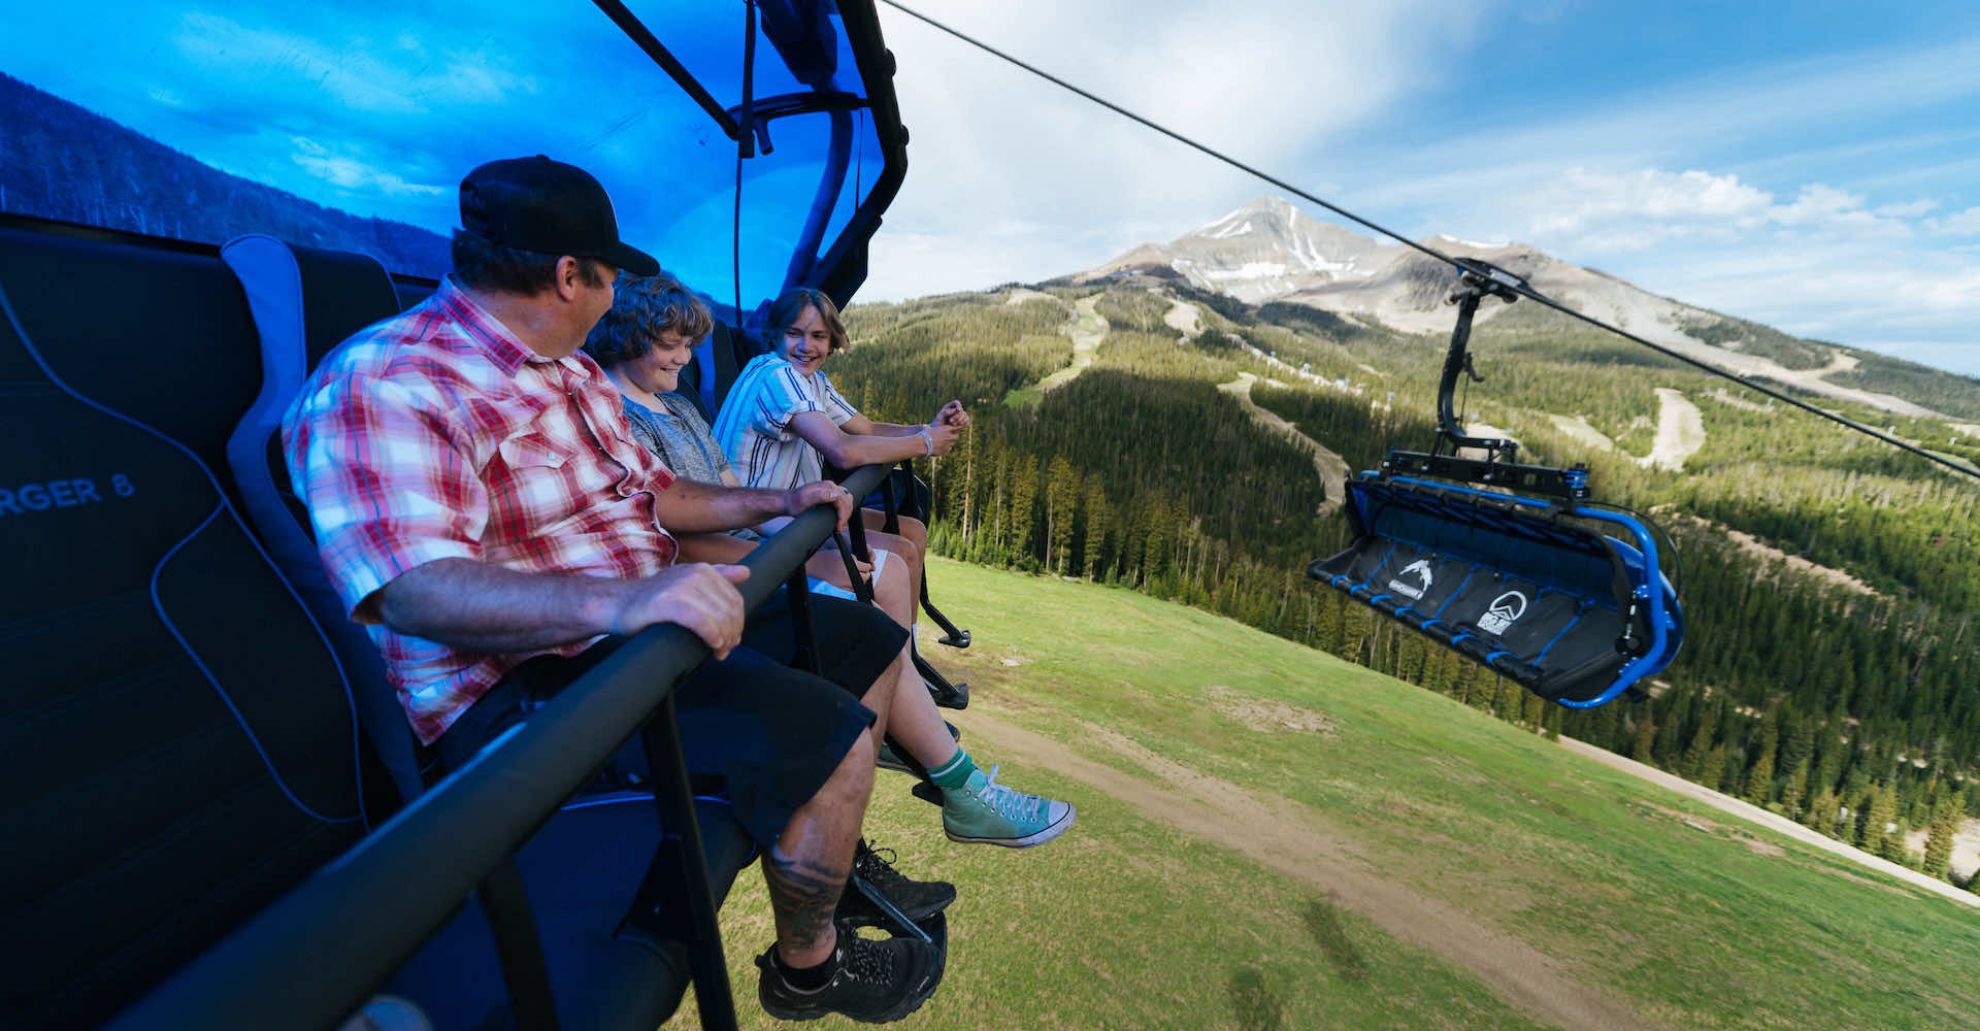 Guided Scenic Lift Ride 